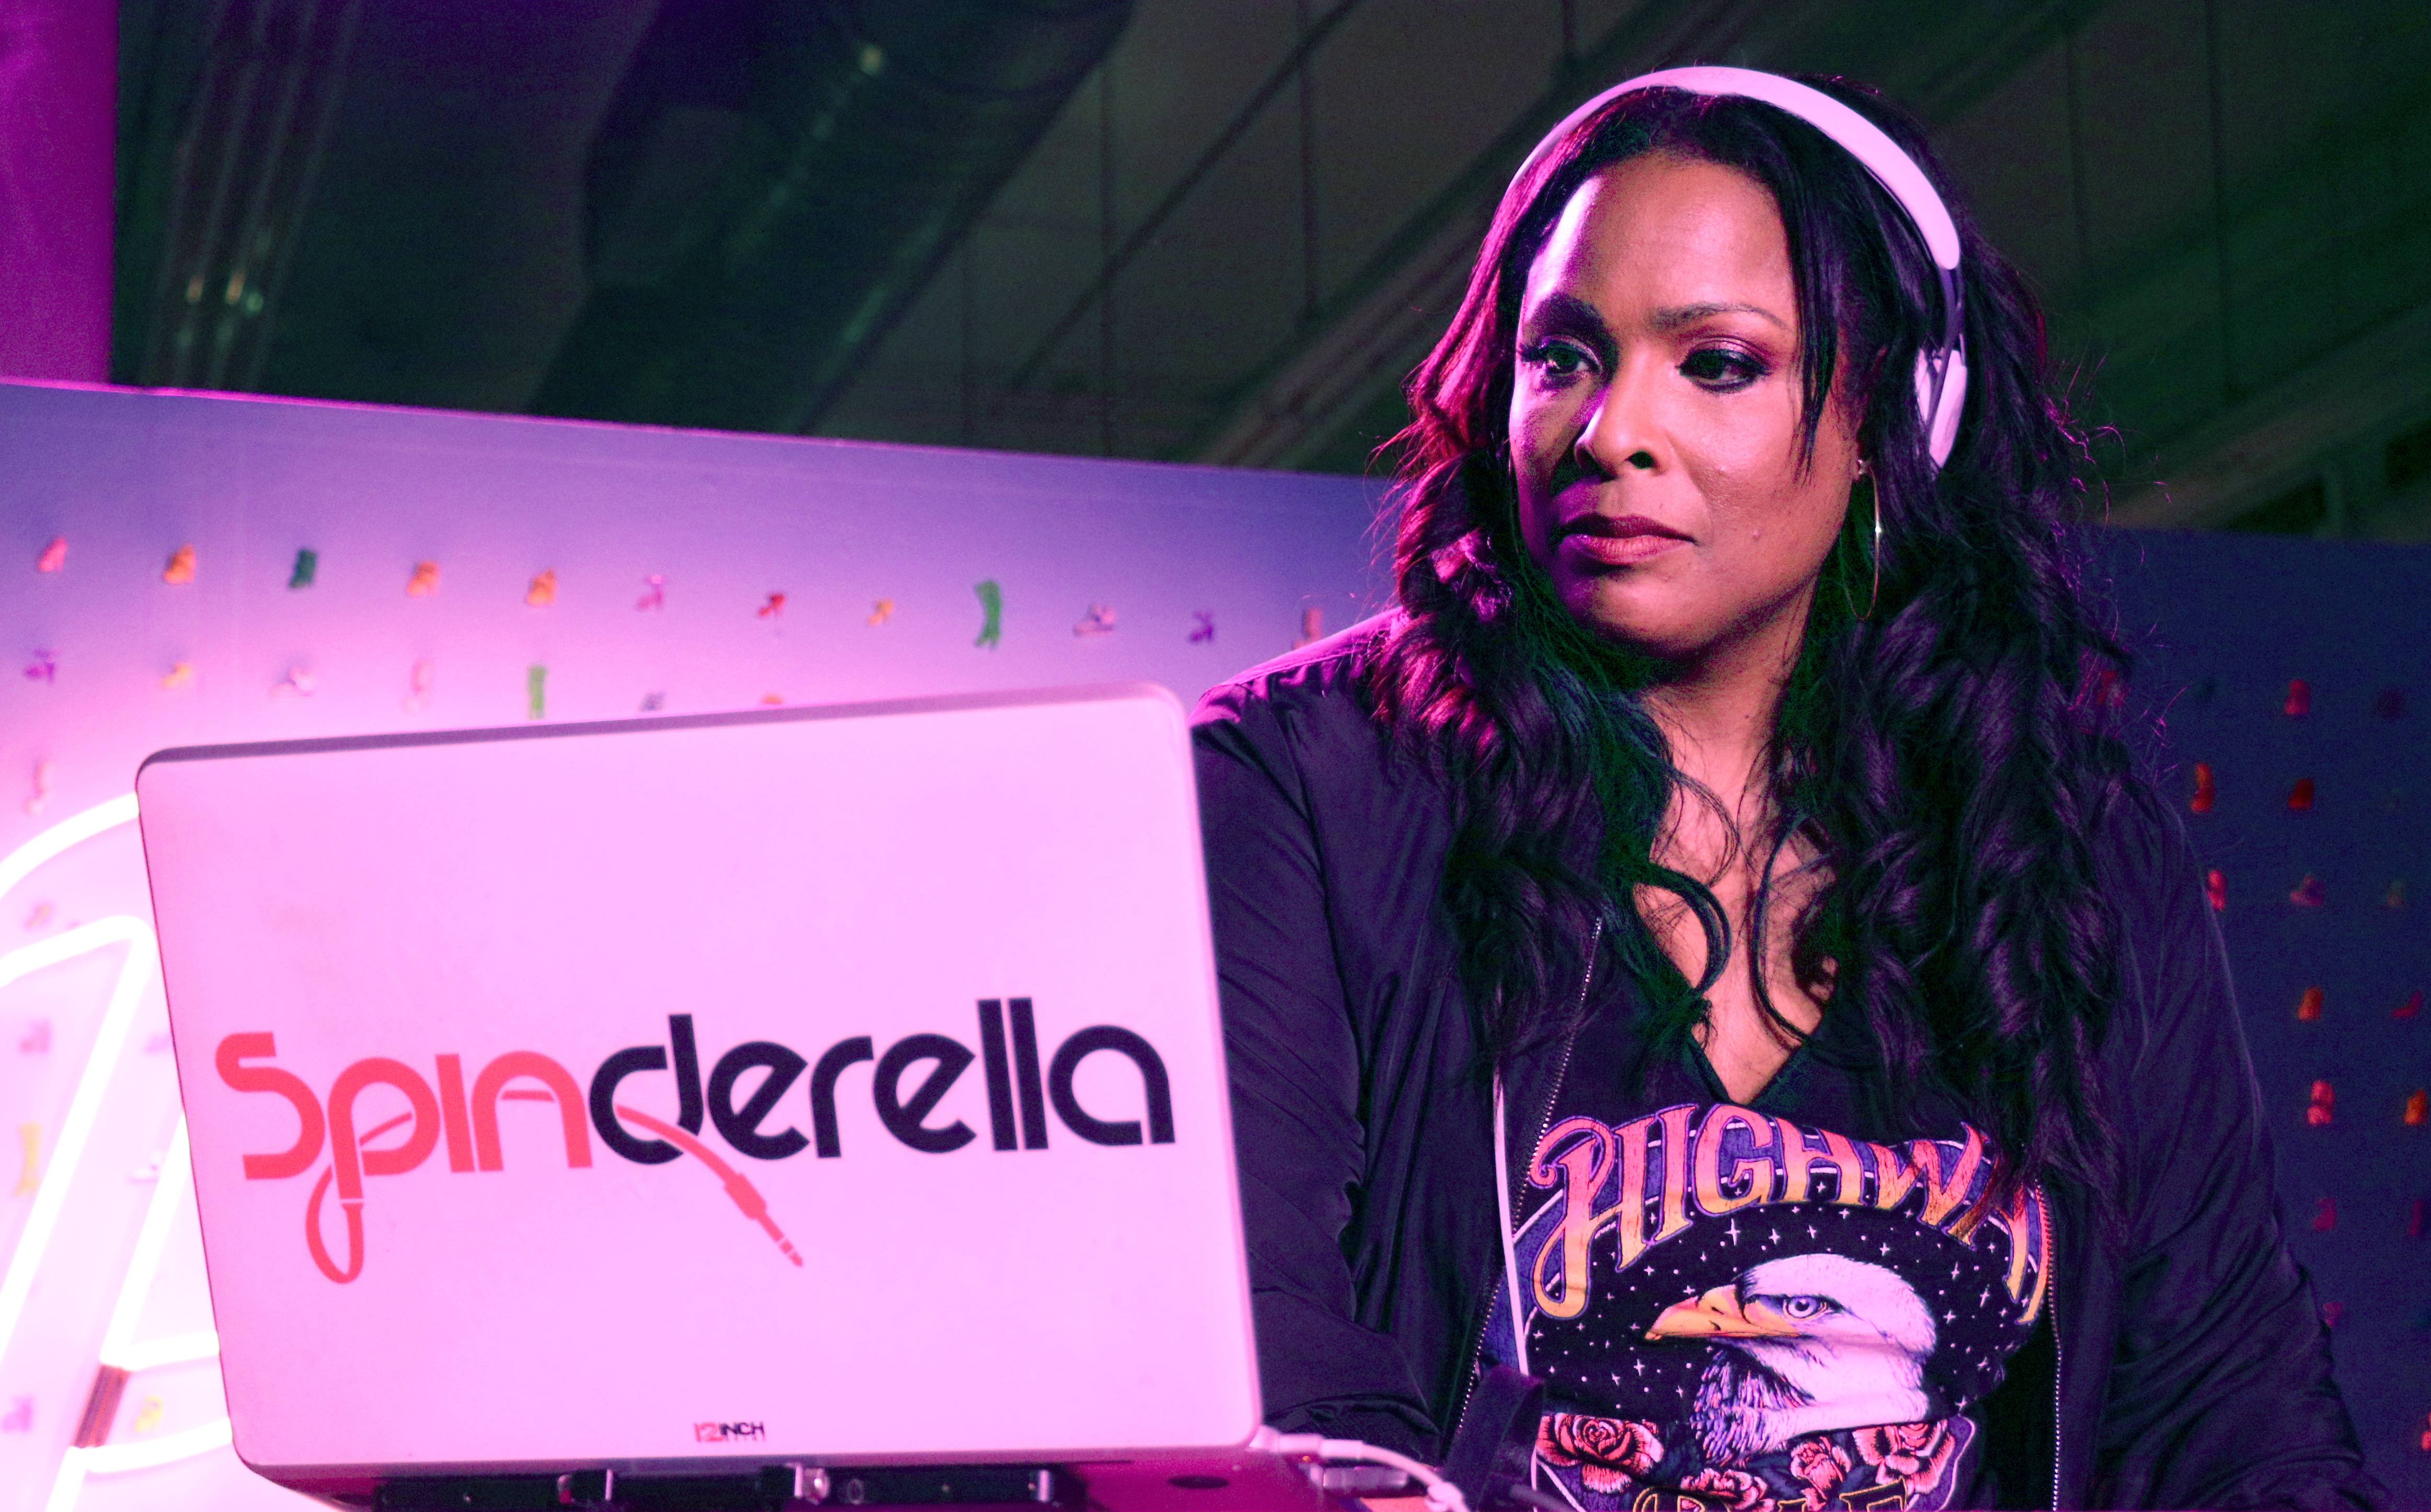 NEW YORK, NEW YORK - MARCH 08: DJ Spinderella attends the Barbie 60th Anniversary Celebration at 505 Broadway on March 08, 2019 in New York City. (Photo by Jim Spellman/Getty Images)